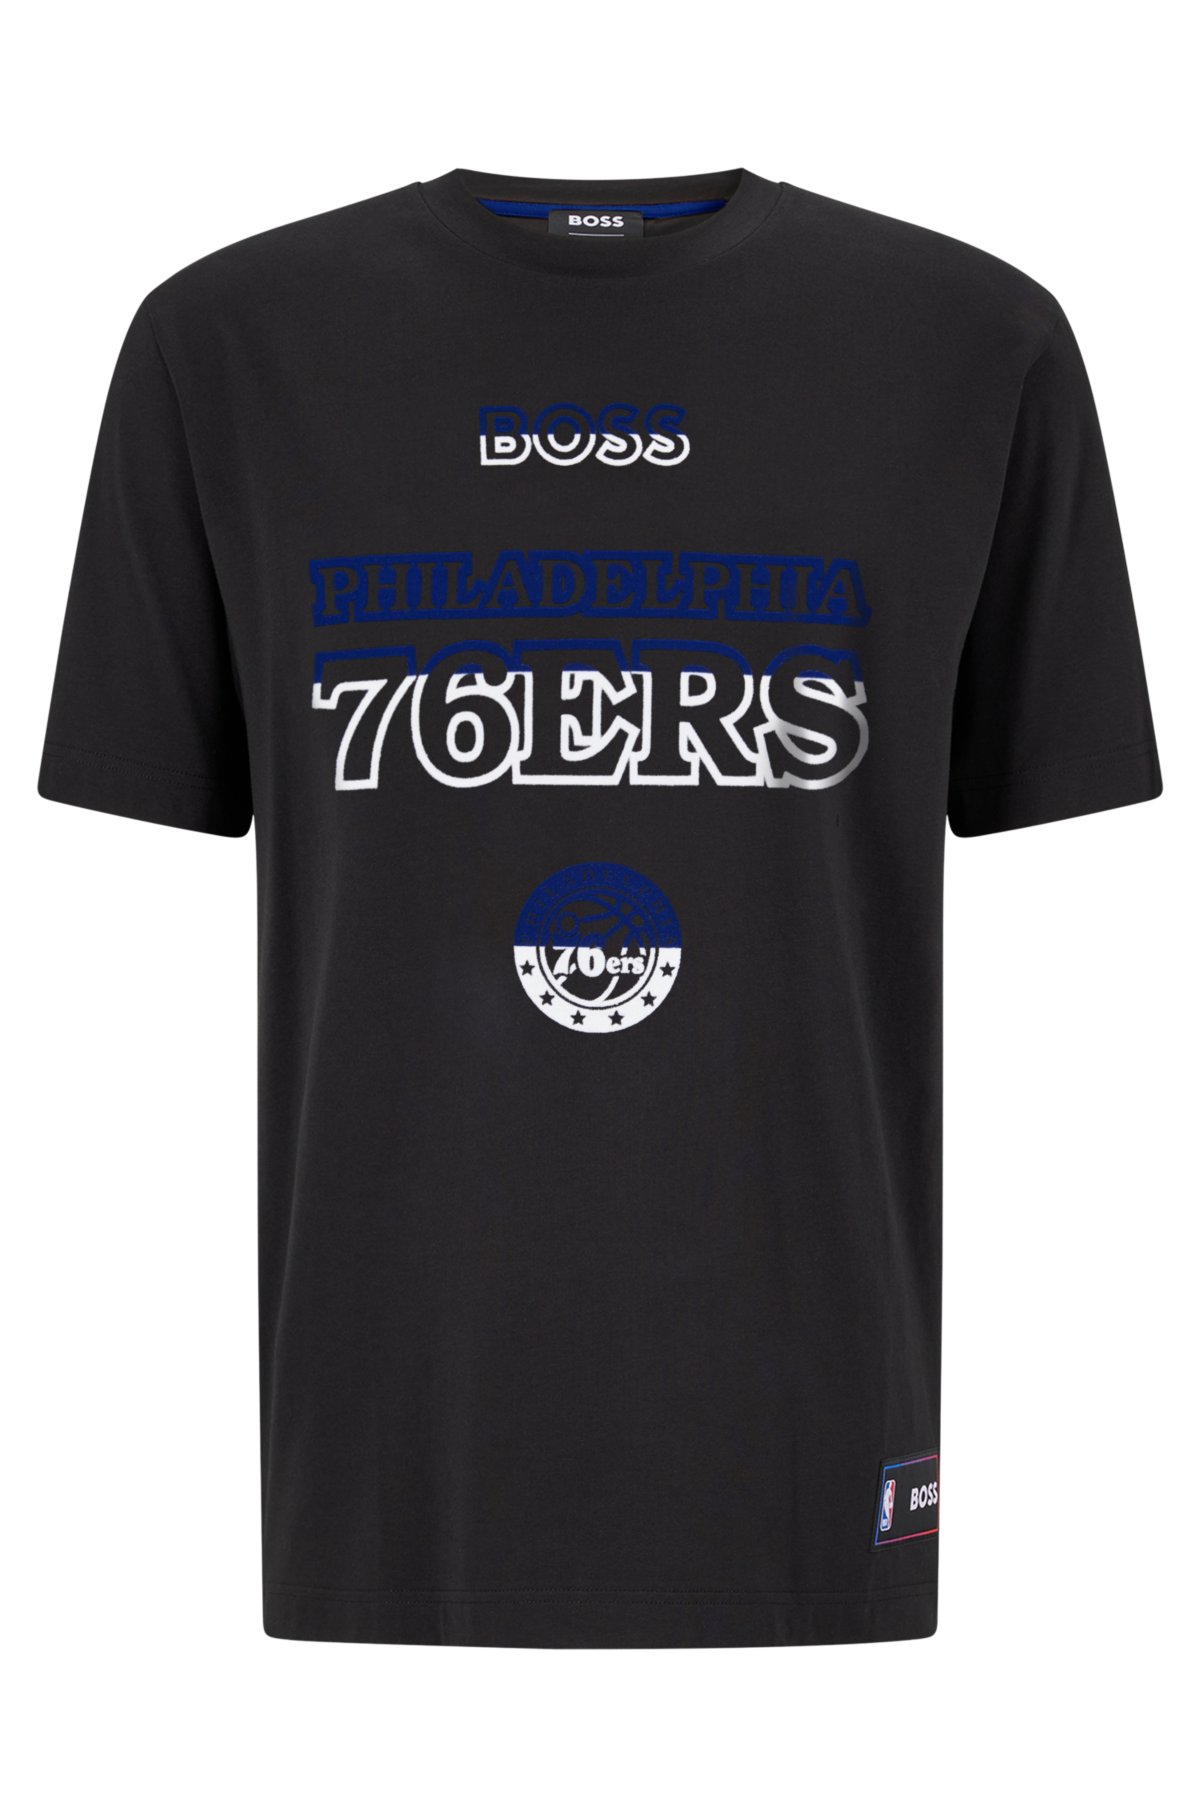 NBA NFT: Sixers Heritage Collection